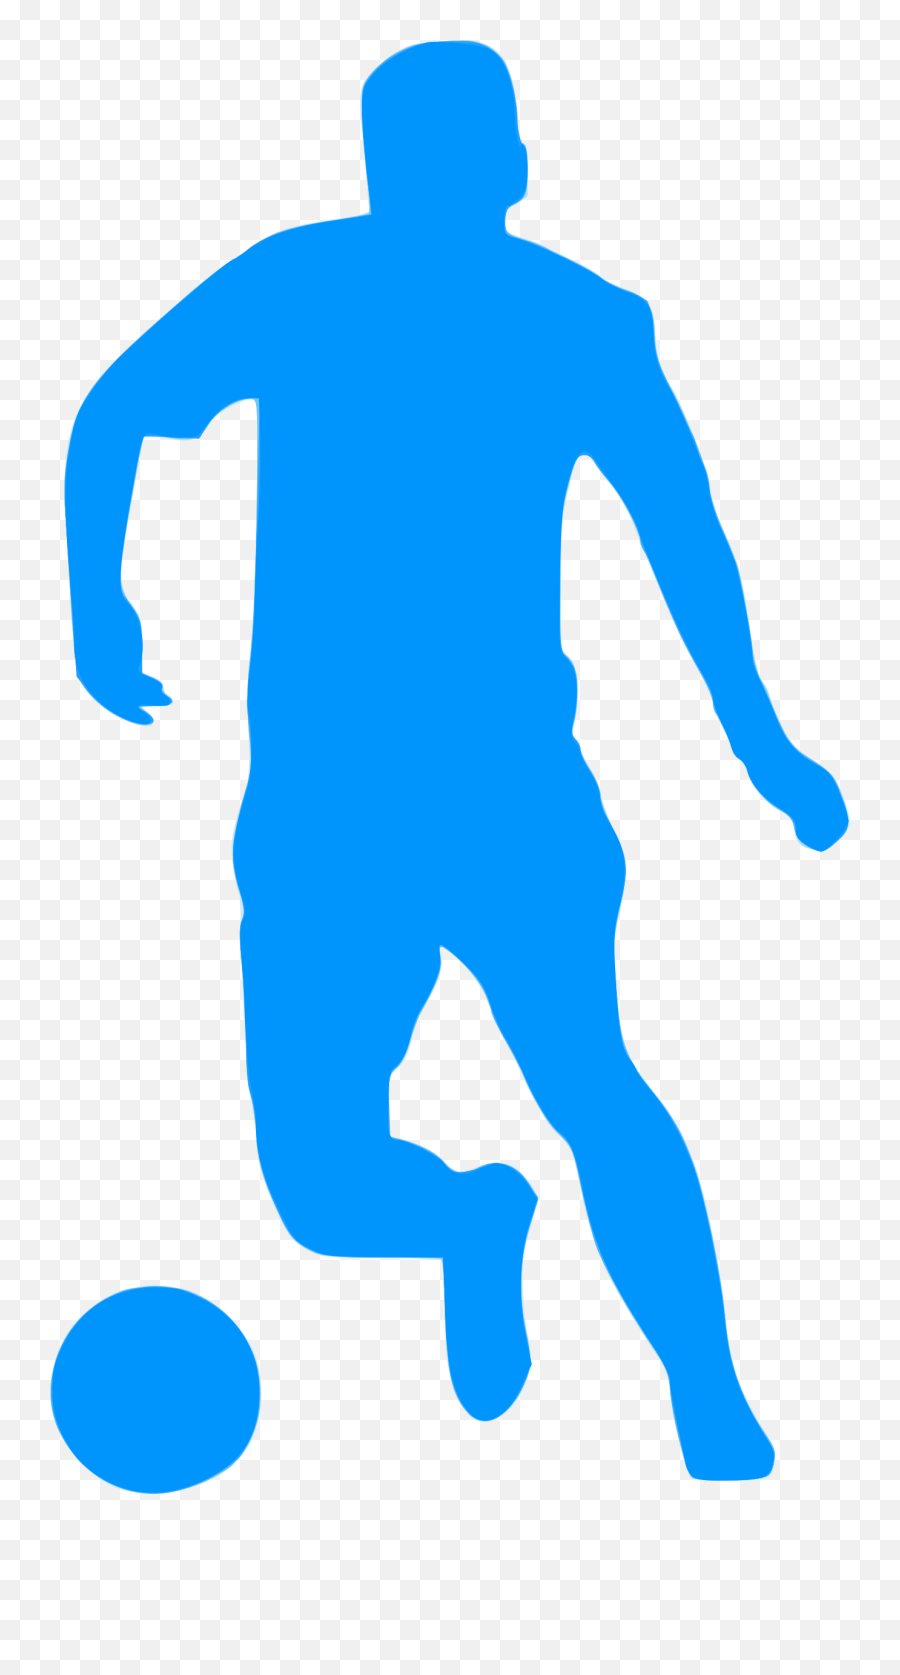 American Football Player Silhouette Png - Footballer Silhouette Blue Png,Football Silhouette Png